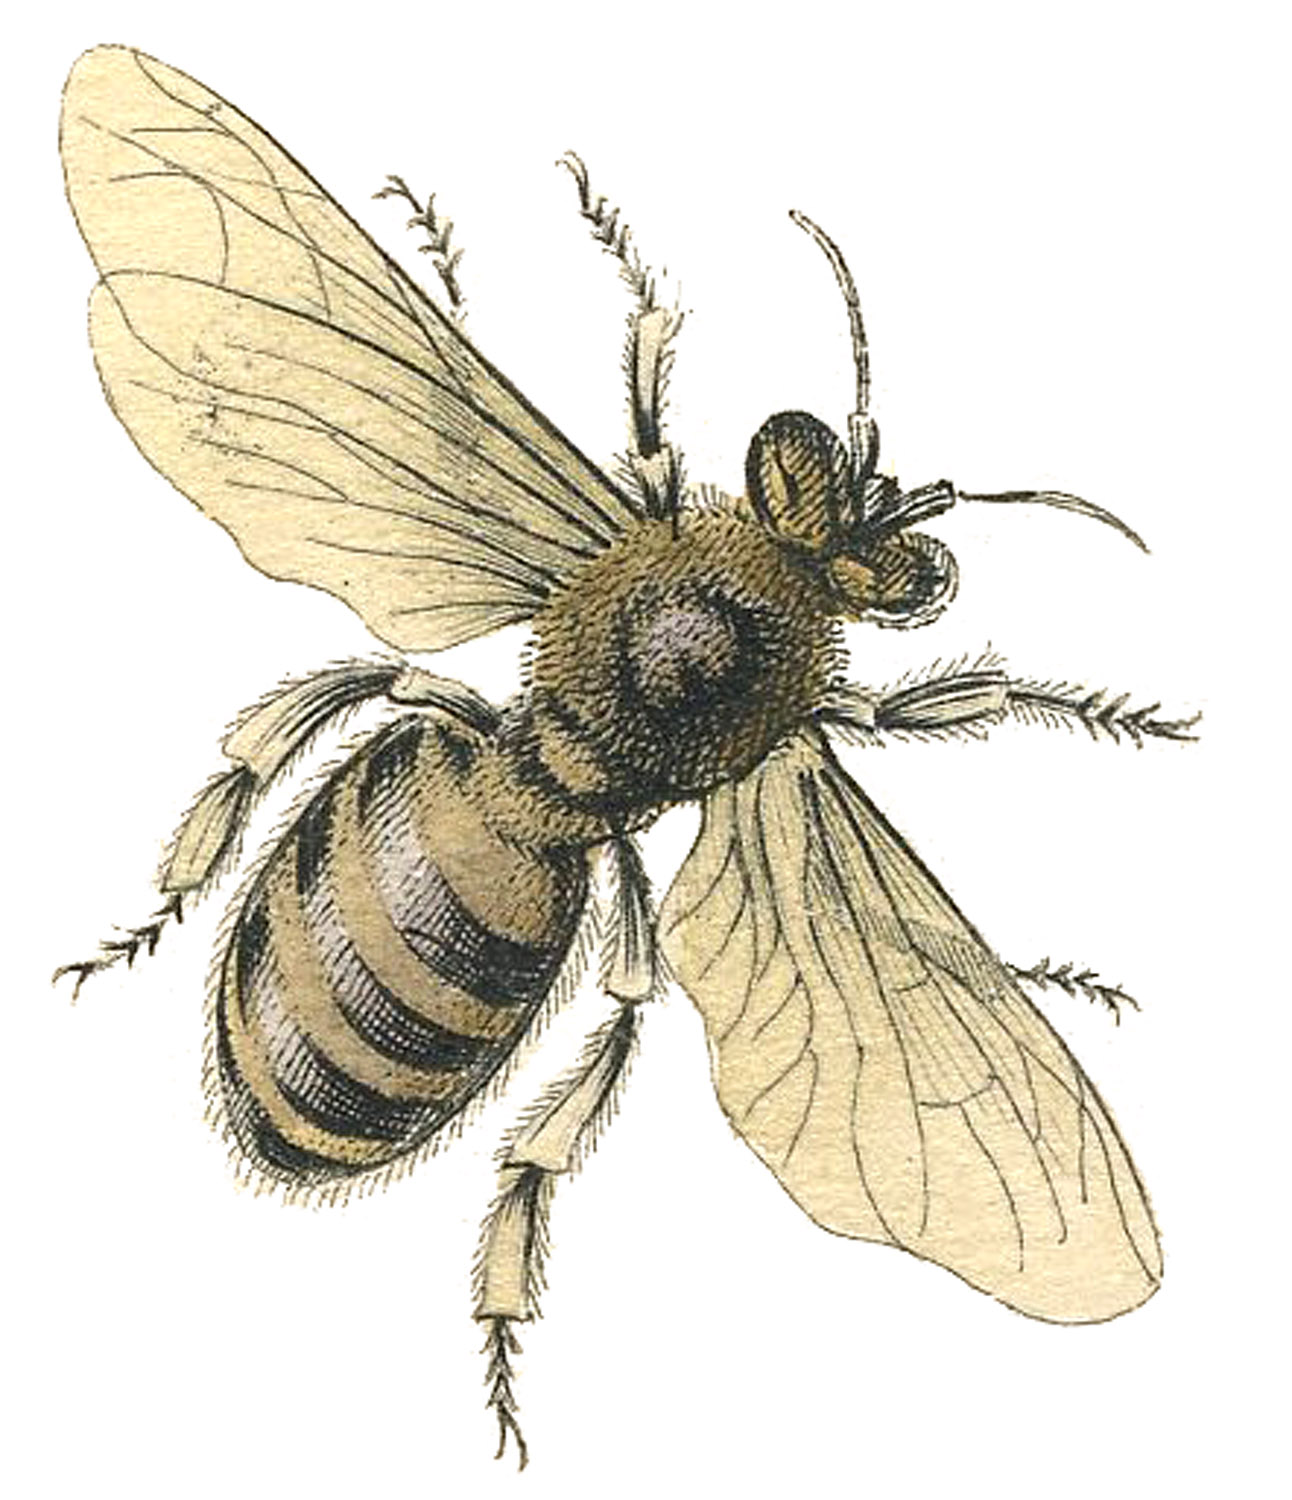 Image Of A Honey Bee This Bee Comes From A Circa 1840 Natural History